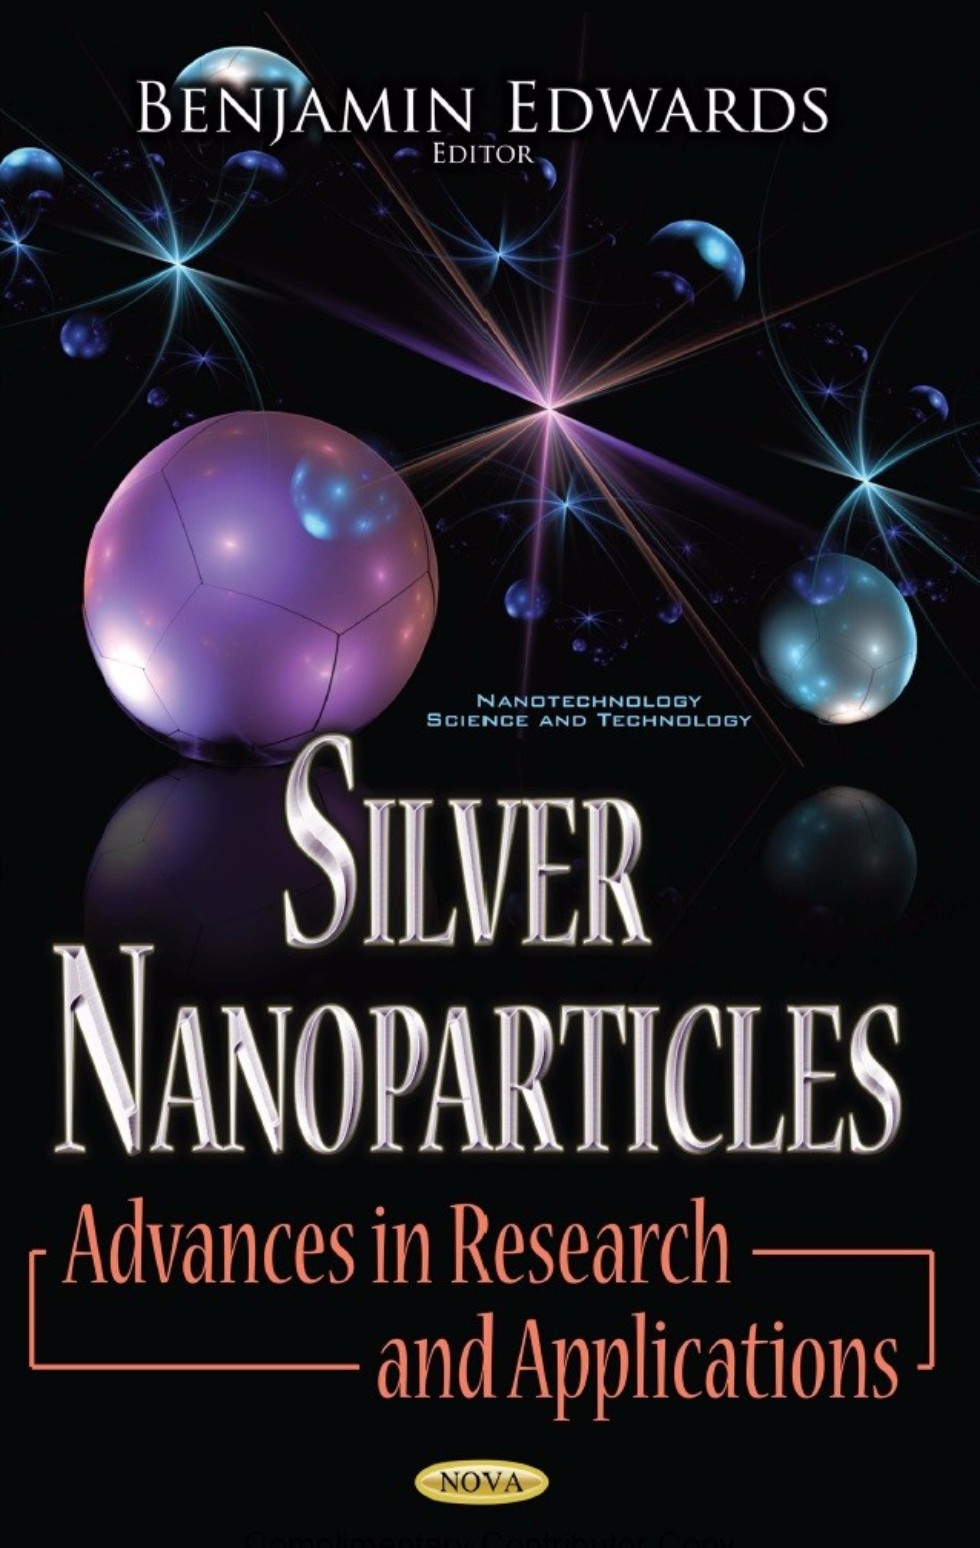   'Fabrication of porous silicon with silver nanoparticles by Ion implantation'   'Silver nanoparticles' ,silver nanoparticles, ion implantation, porous silicon